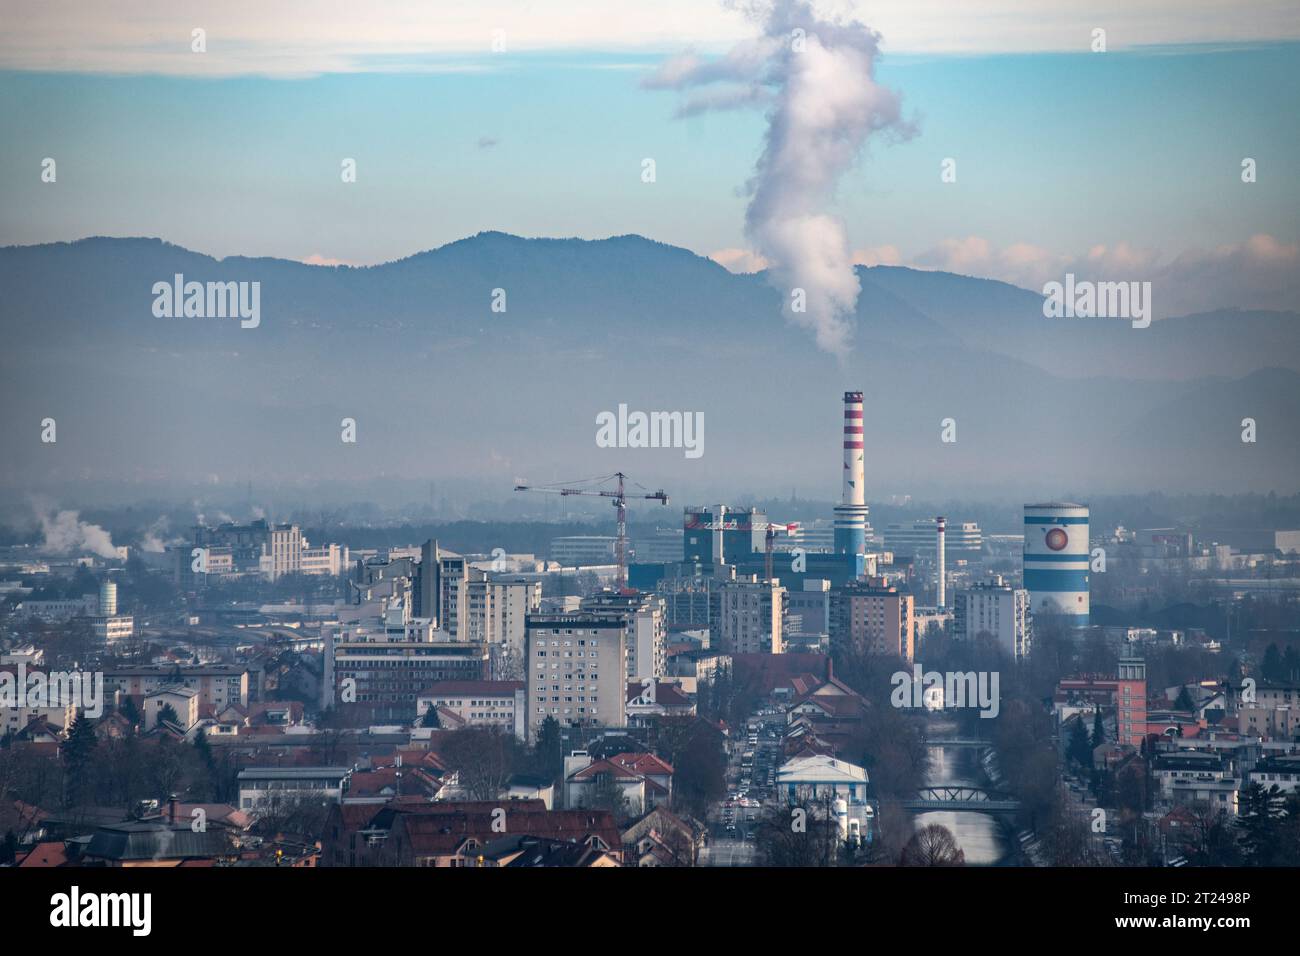 Ljubljana: pollution in the city, with coal industries and chimney. Slovenia Stock Photo